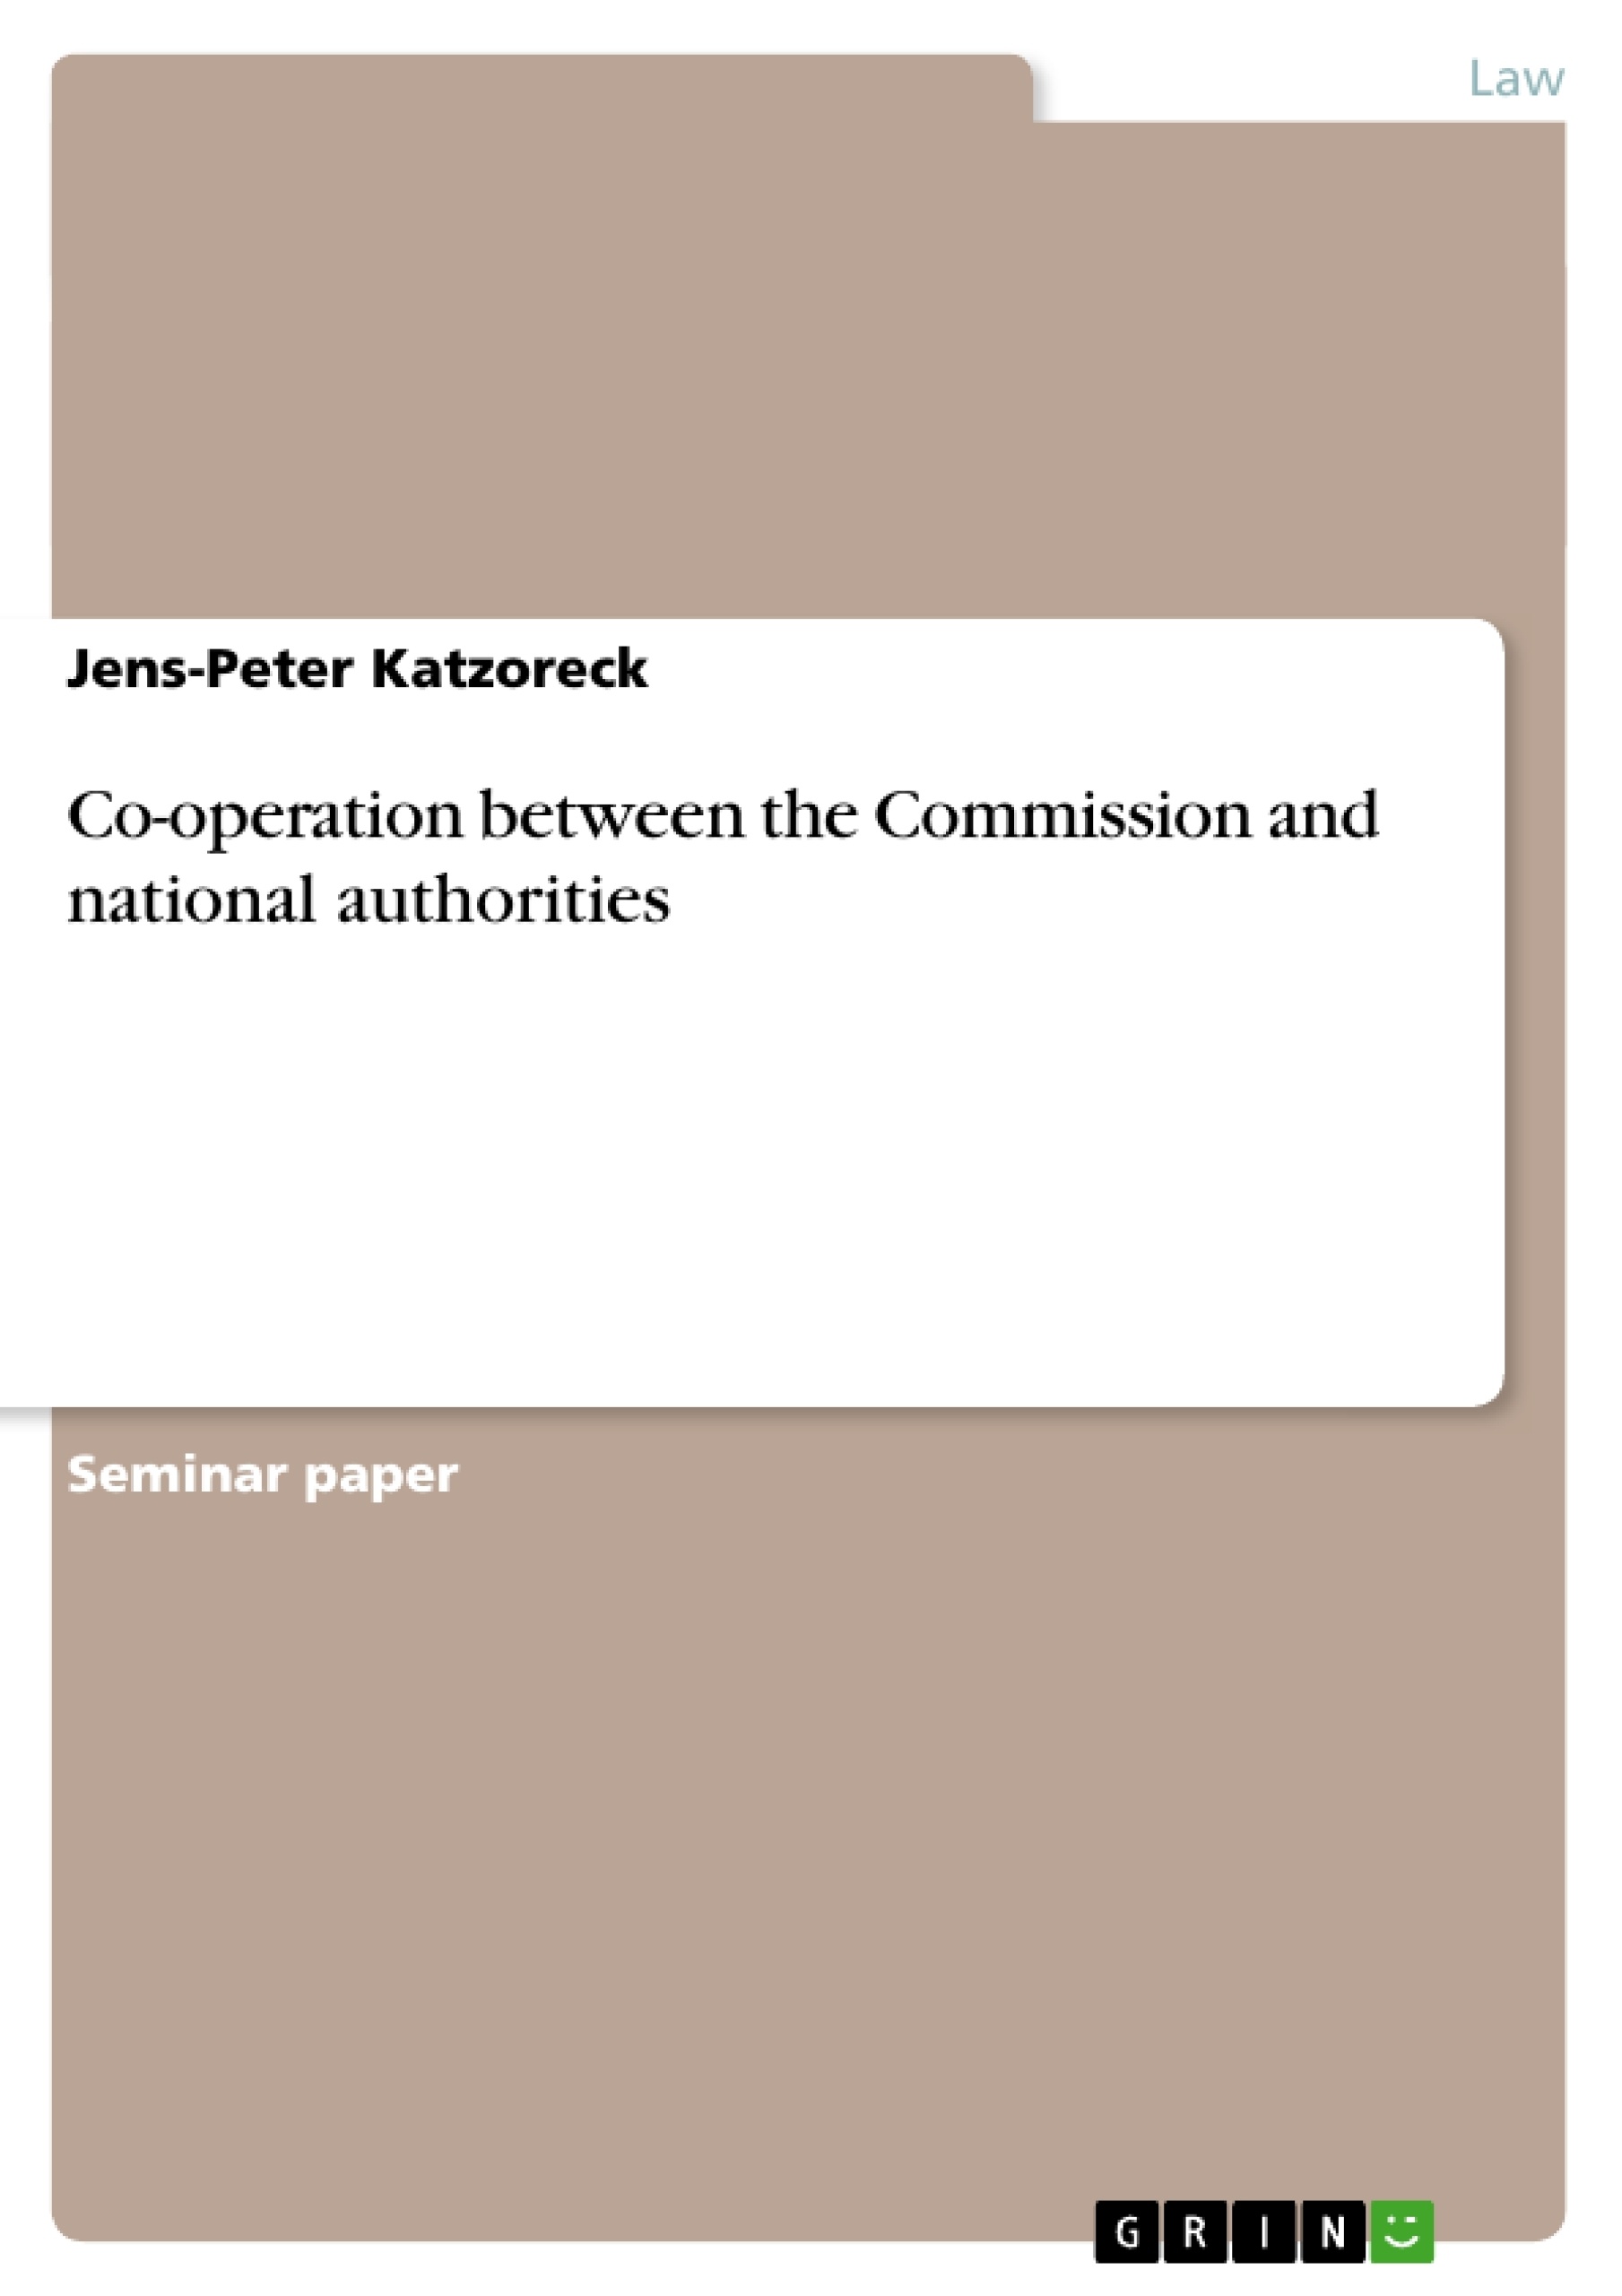 Title: Co-operation between the Commission and national authorities